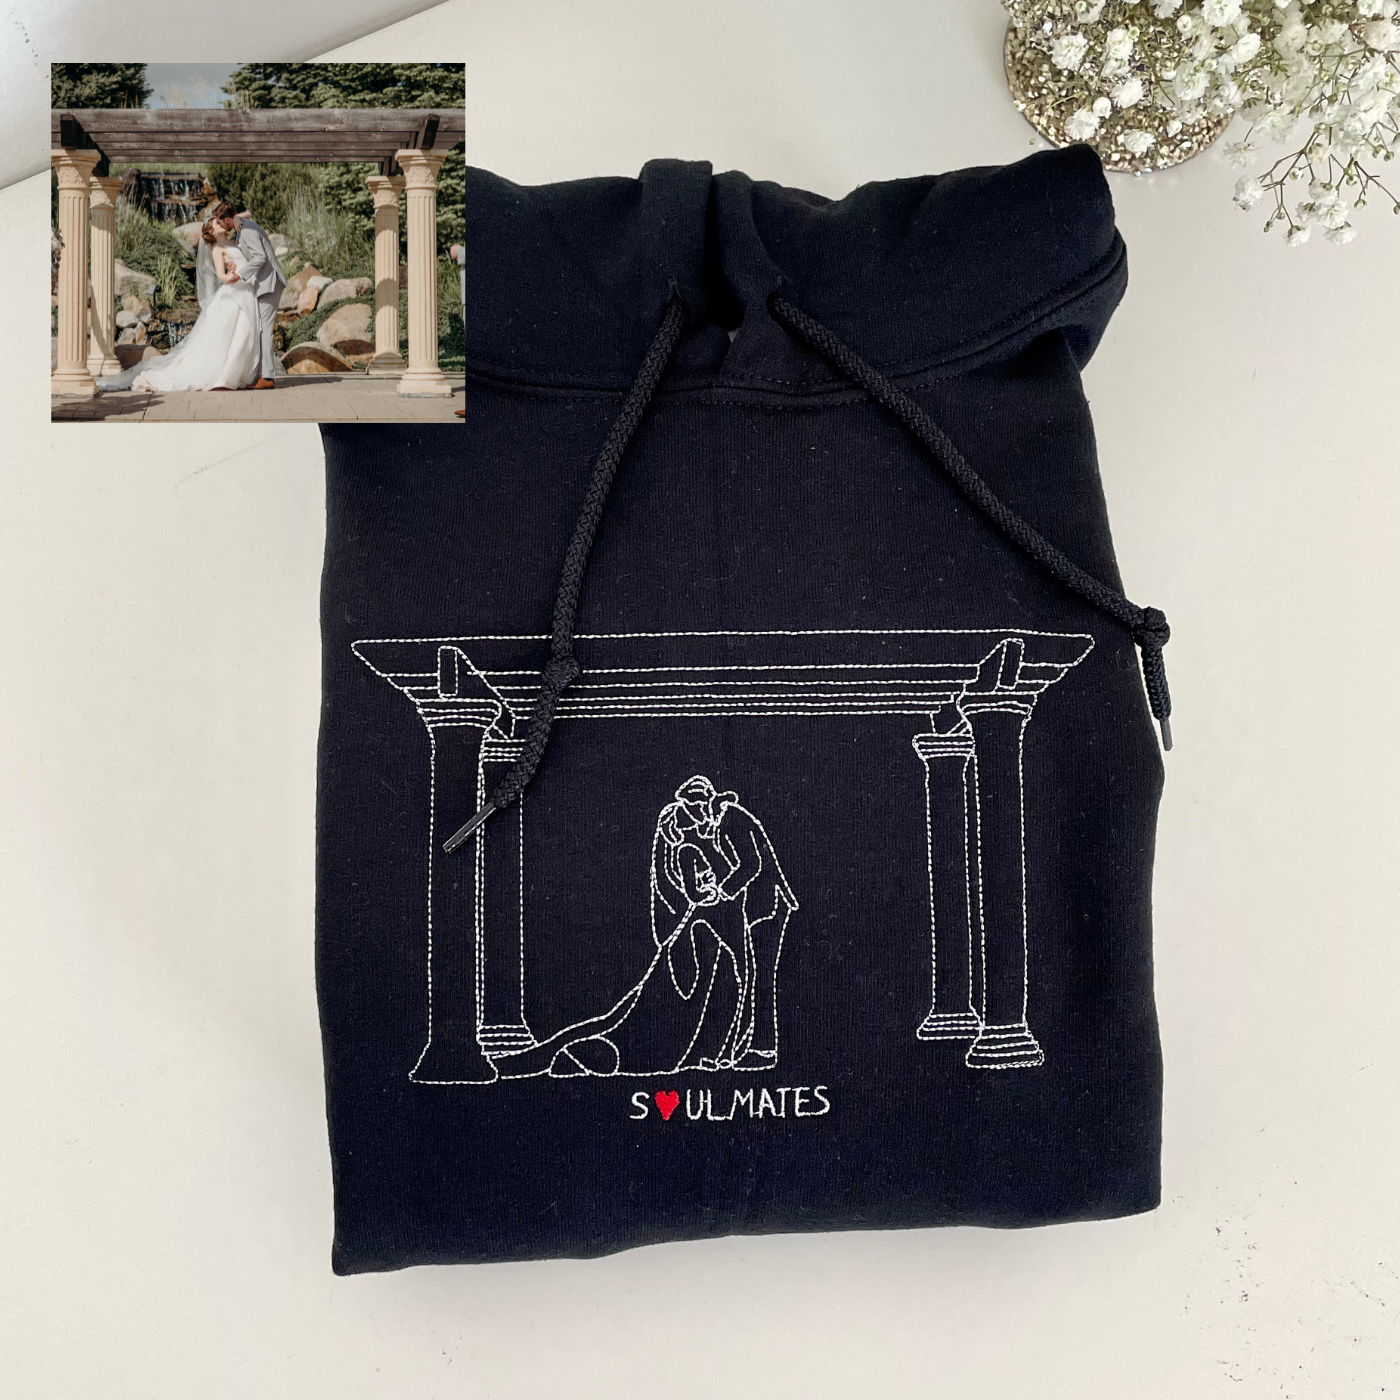 Personalized Hoodie anniversary gift embroidered image outline